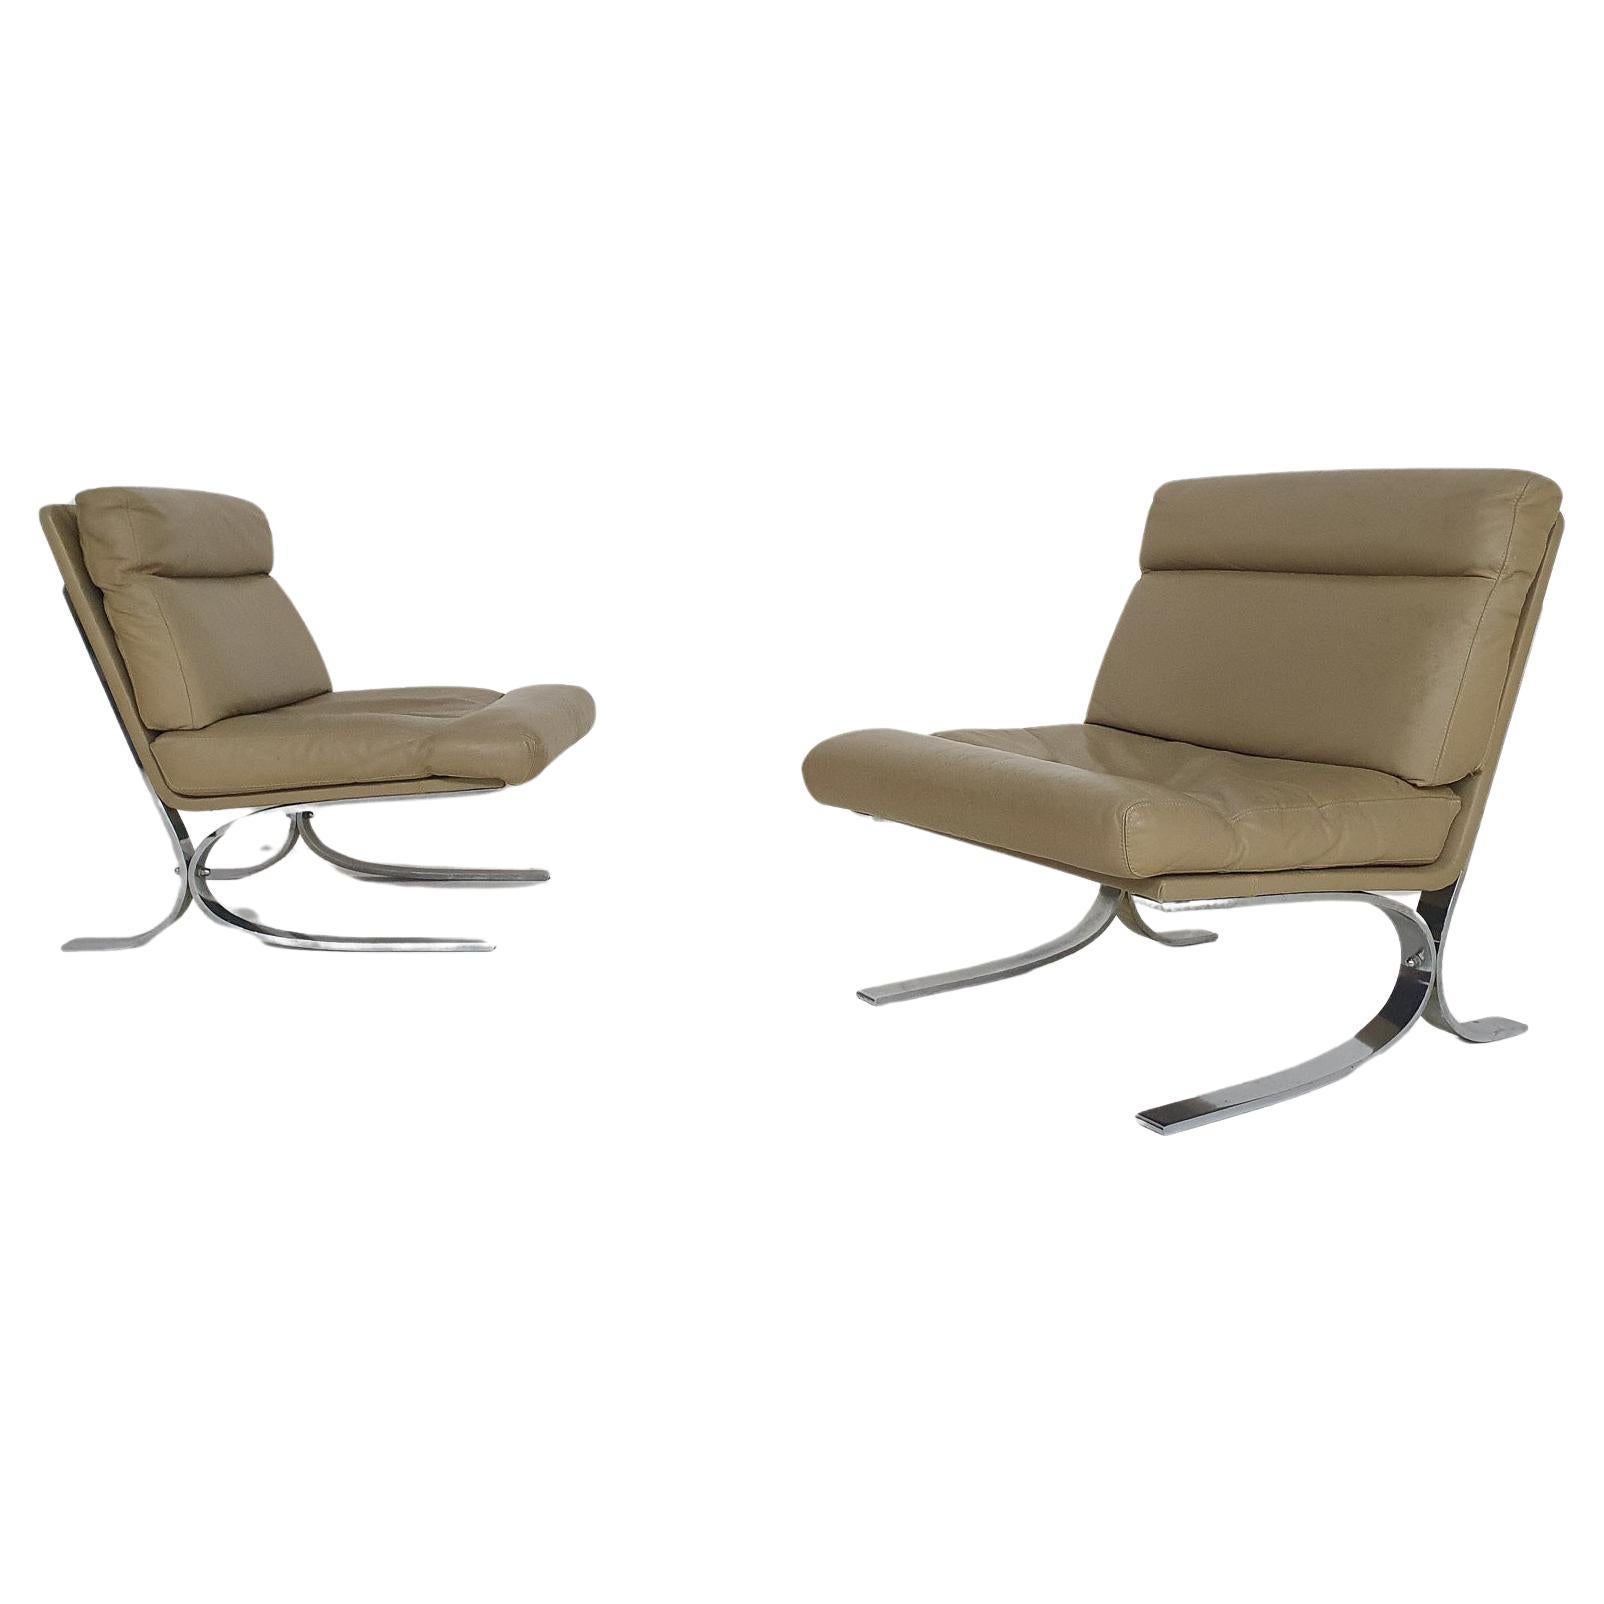 Set of 2 leather Lounge Chairs Attributed to Paul Tuttle for Strässle, 1970s For Sale